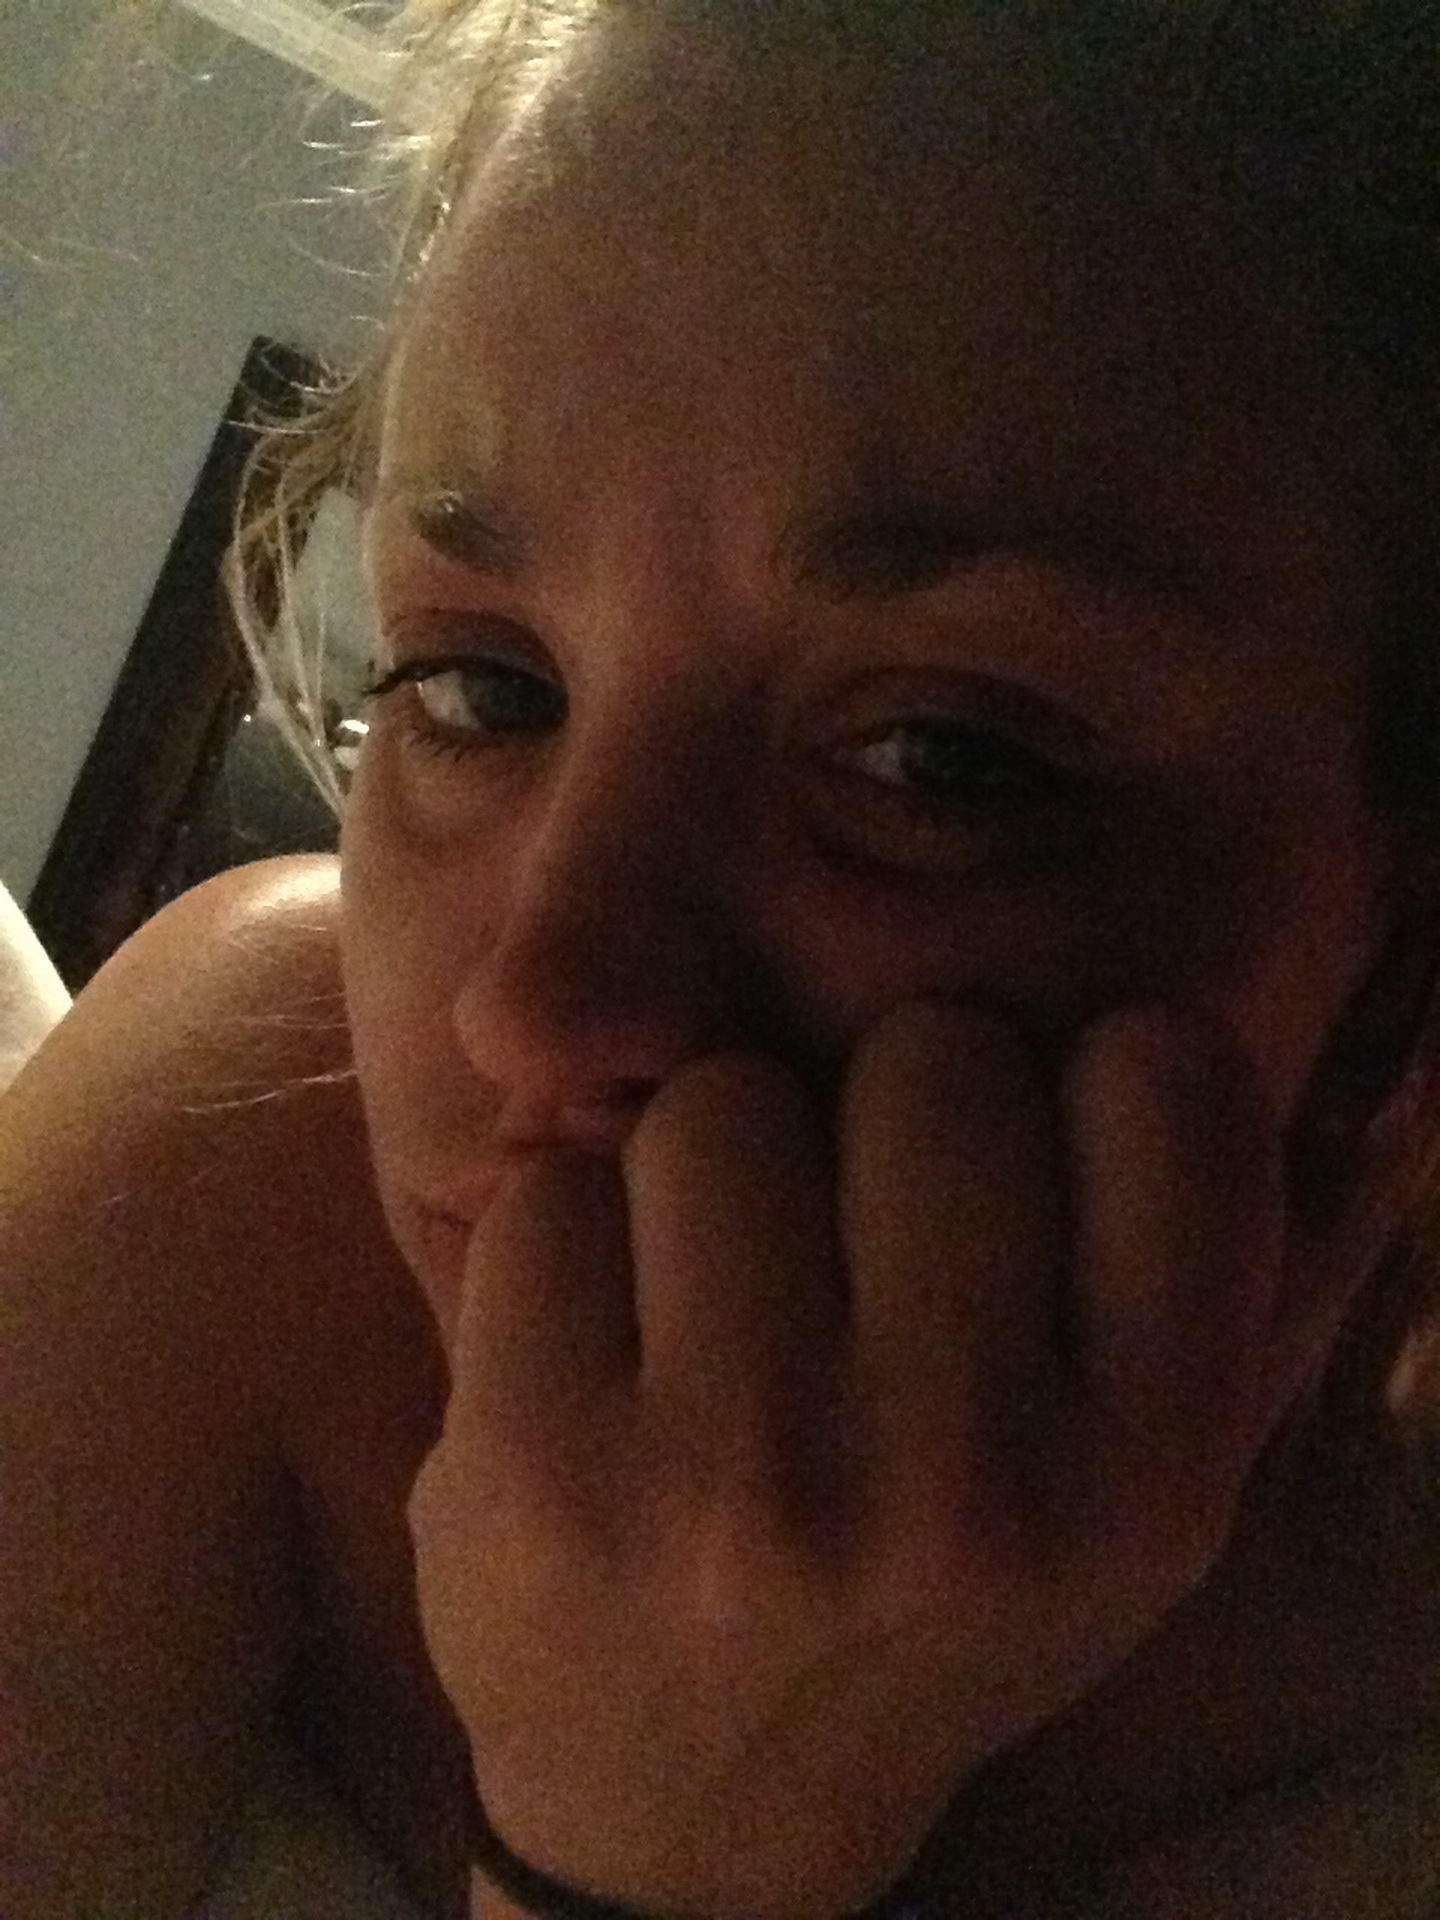 Kaley_Cuoco_leaked_private_nude_photo_and_video_hacked_personal_naked_pics_46x_MixQ_28.jpg